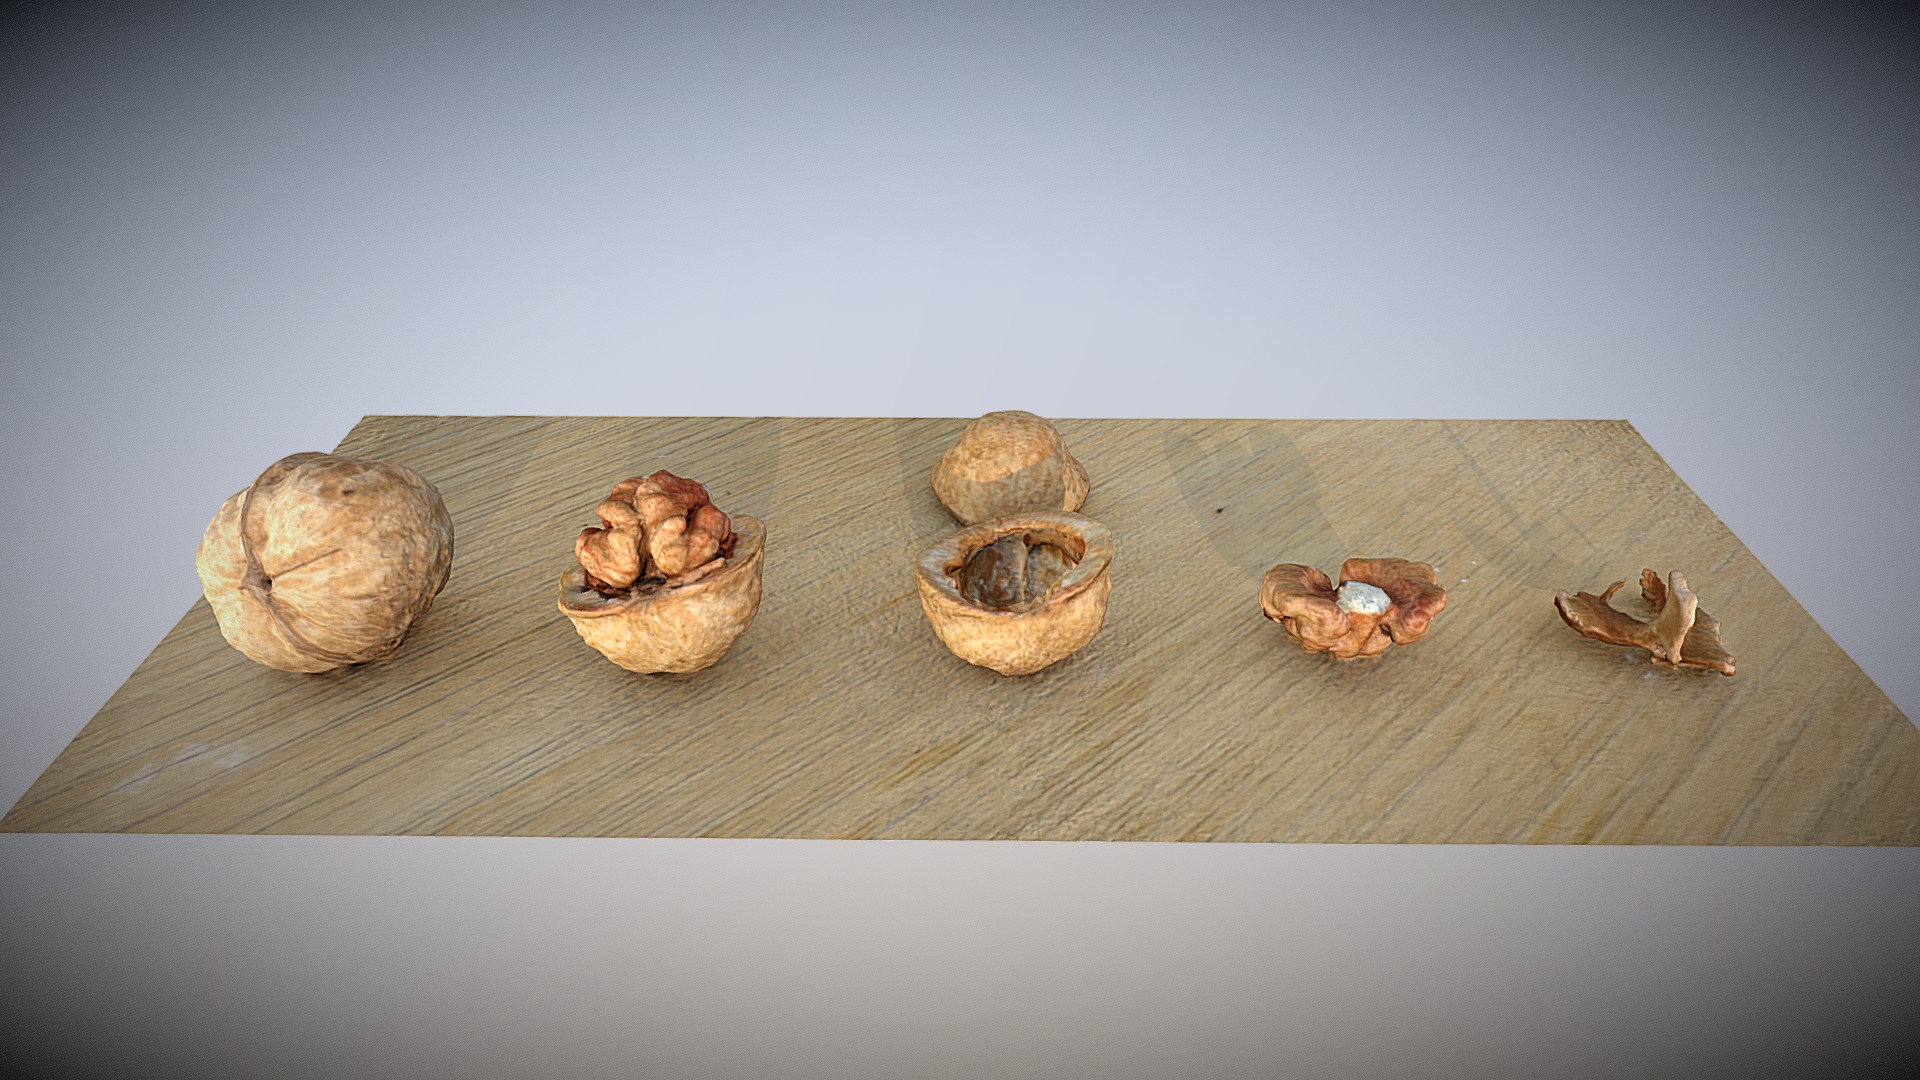 3D model Walnut at different stages of cleaning – SCAN - This is a 3D model of the Walnut at different stages of cleaning - SCAN. The 3D model is about a group of mushrooms on a wooden surface.